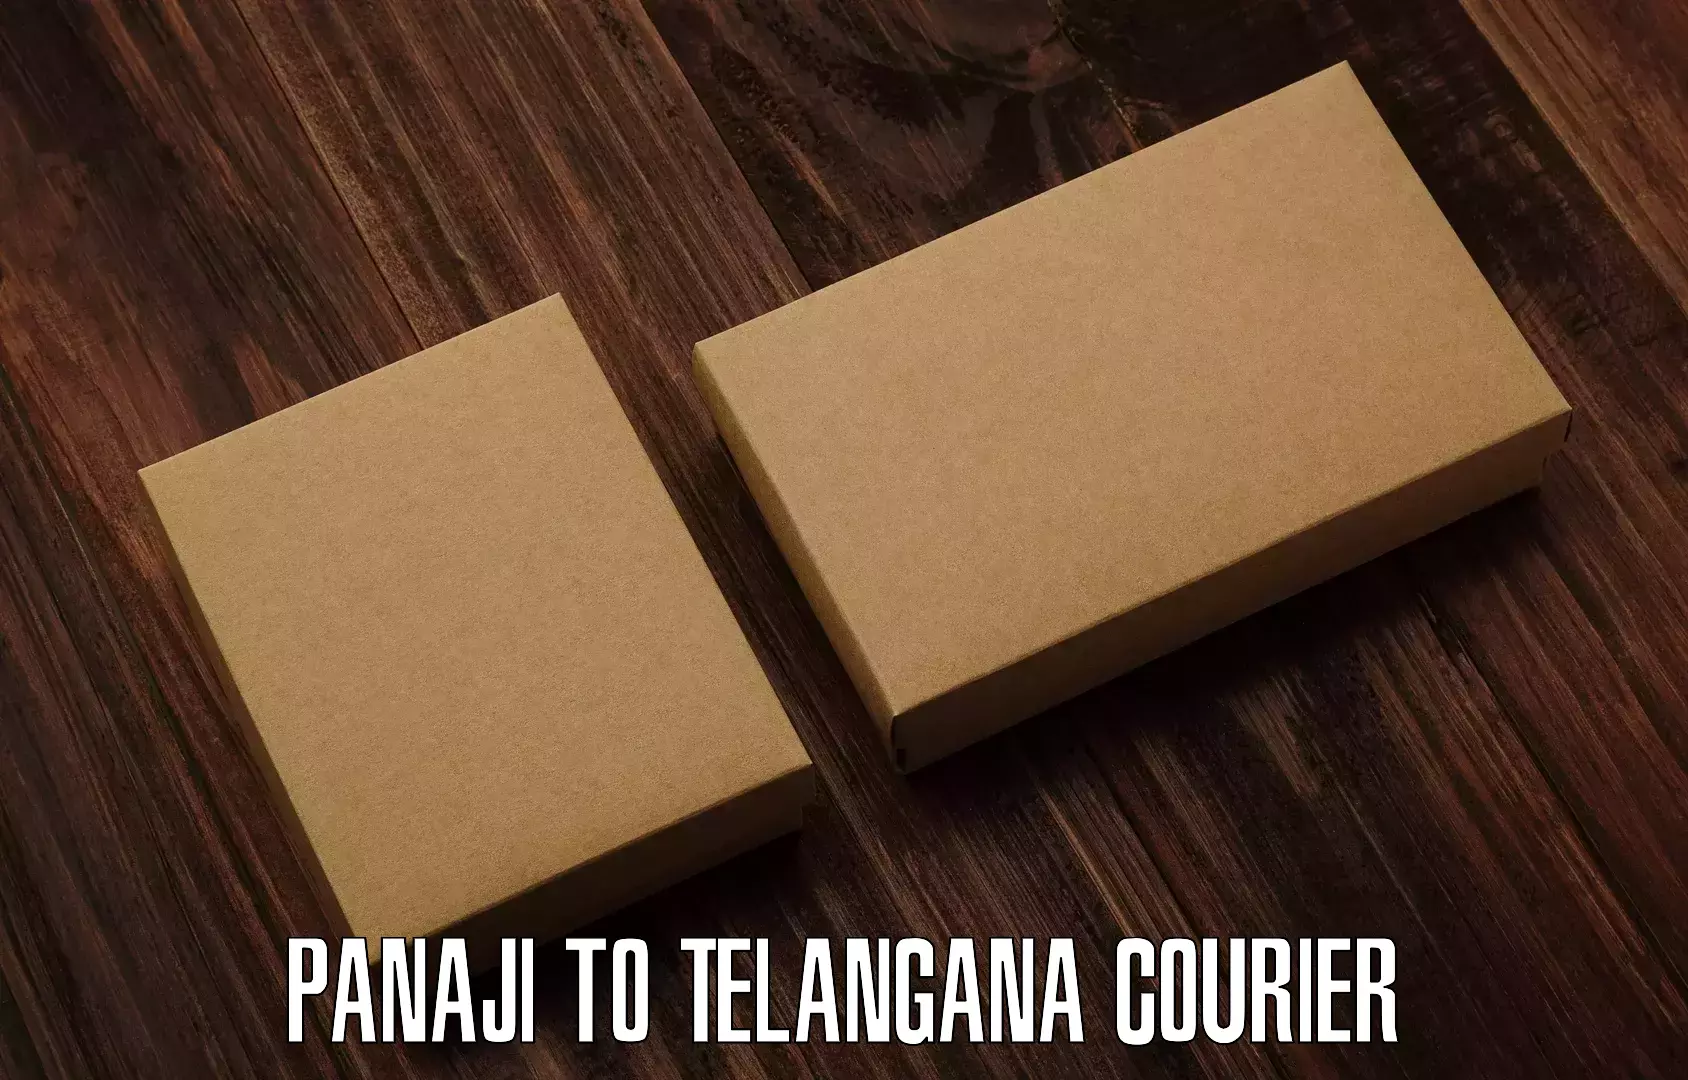 Global courier networks Panaji to Manthani